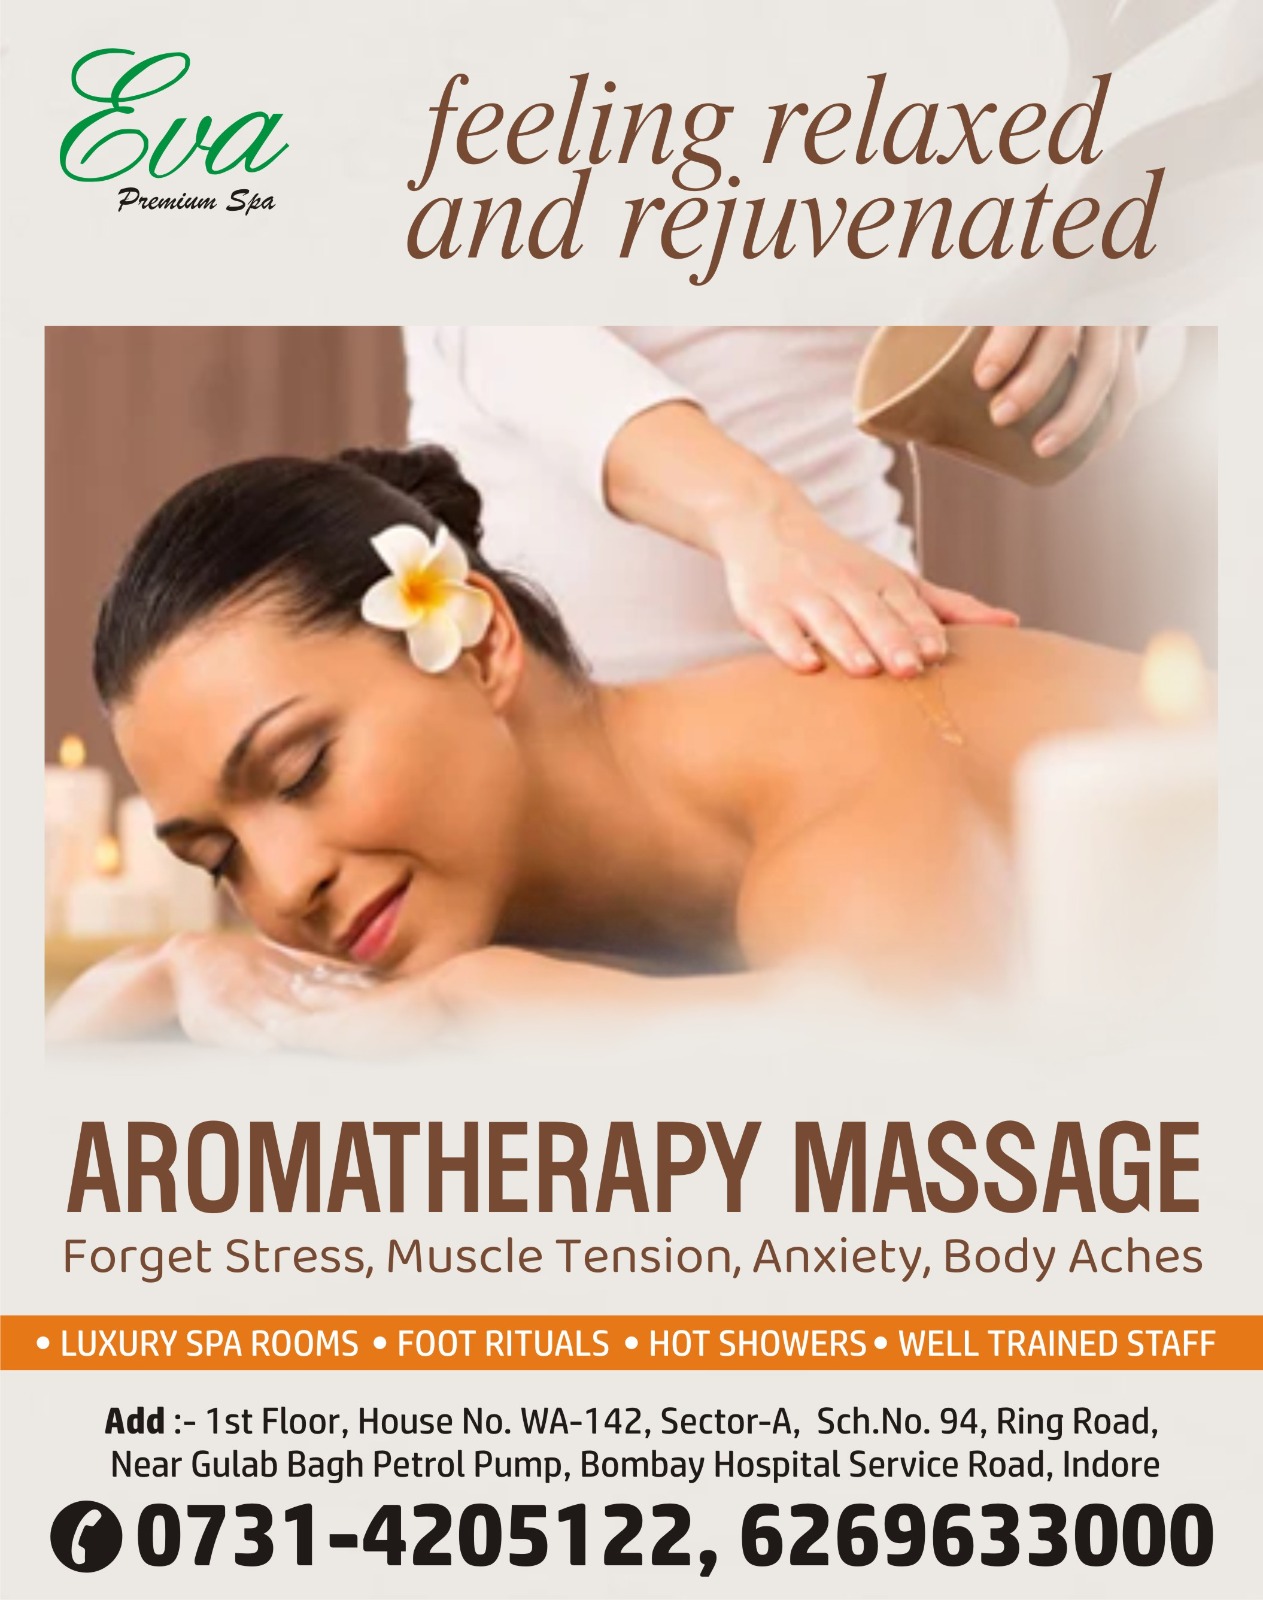 Best Aromatherapy Massage Services in Indore